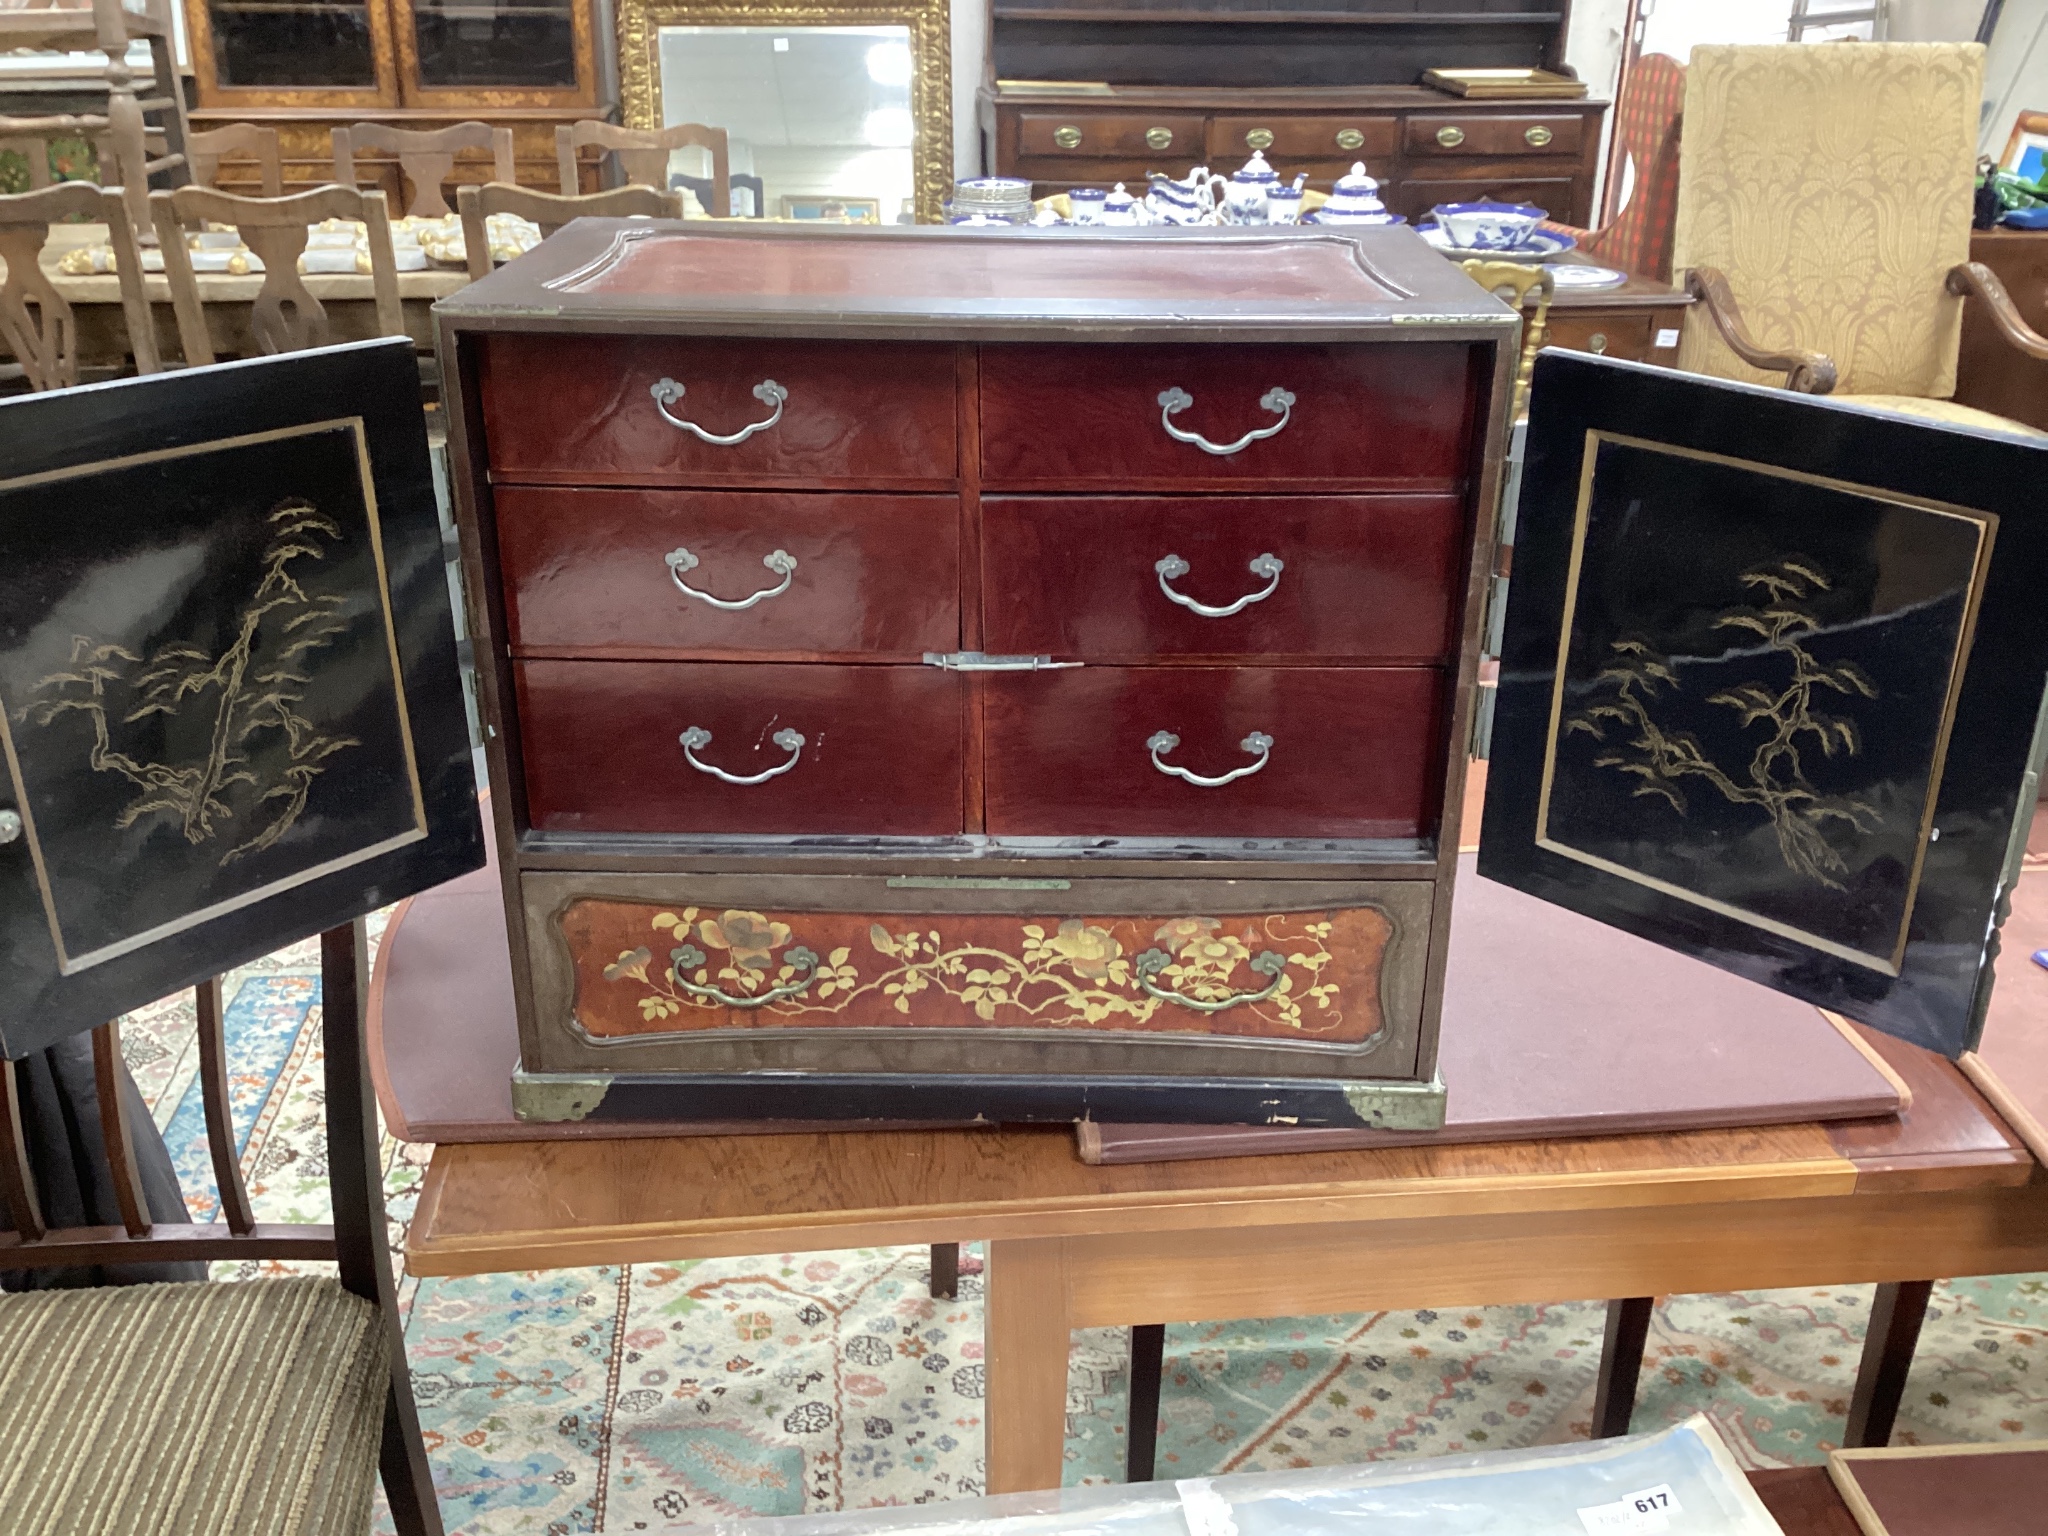 A Japanese Meiji period lacquer table cabinet, width 54cms, depth 32cms, height 48cms.